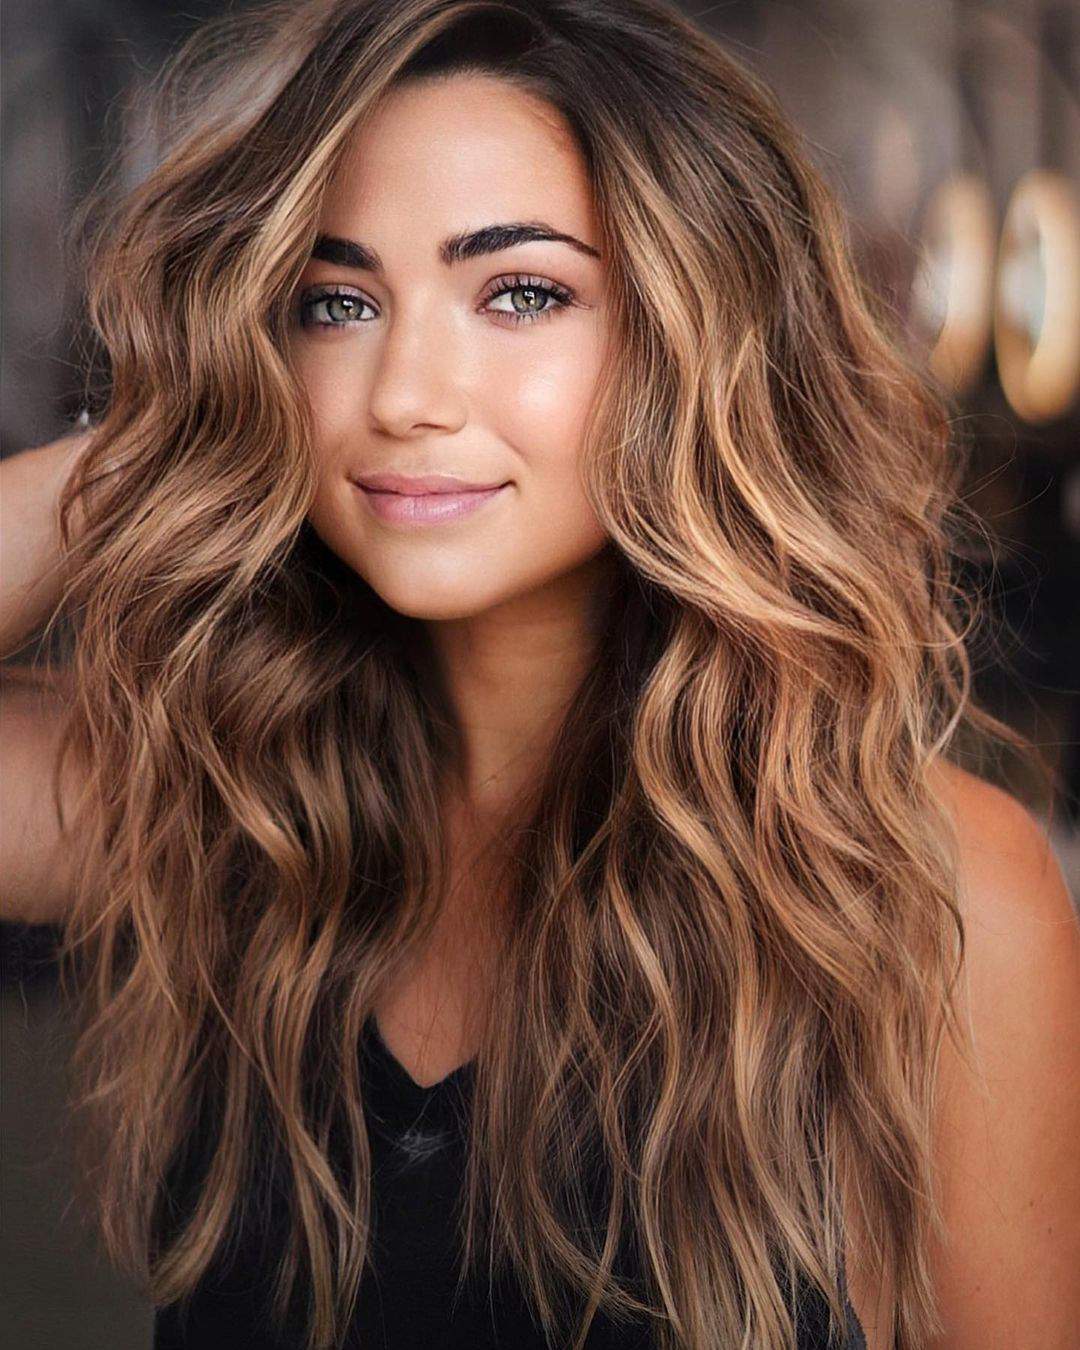 100+ Trendy Hairstyle Ideas For Women To Try In 2021 images 64